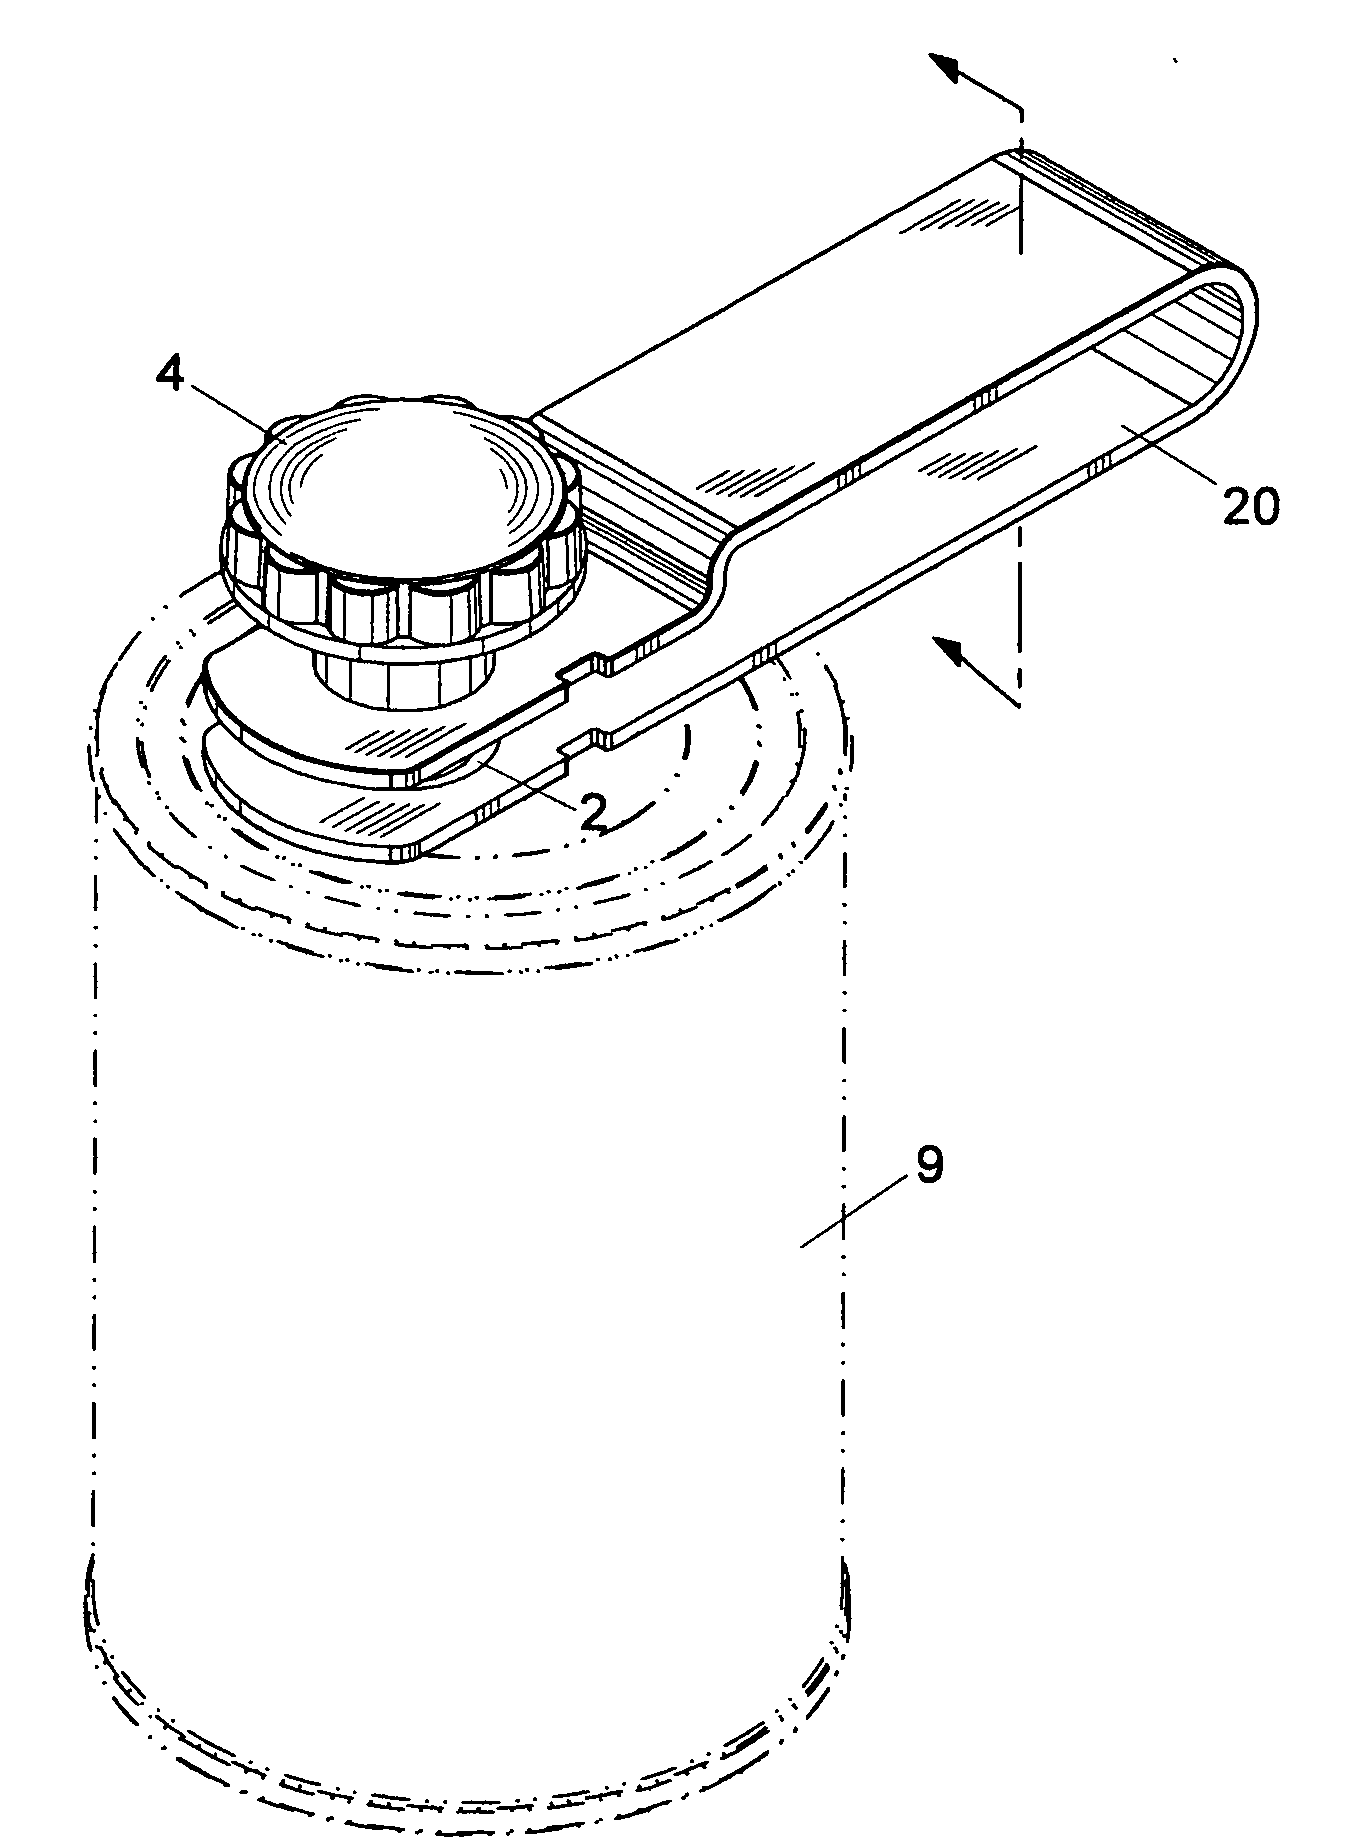 Container piercing device